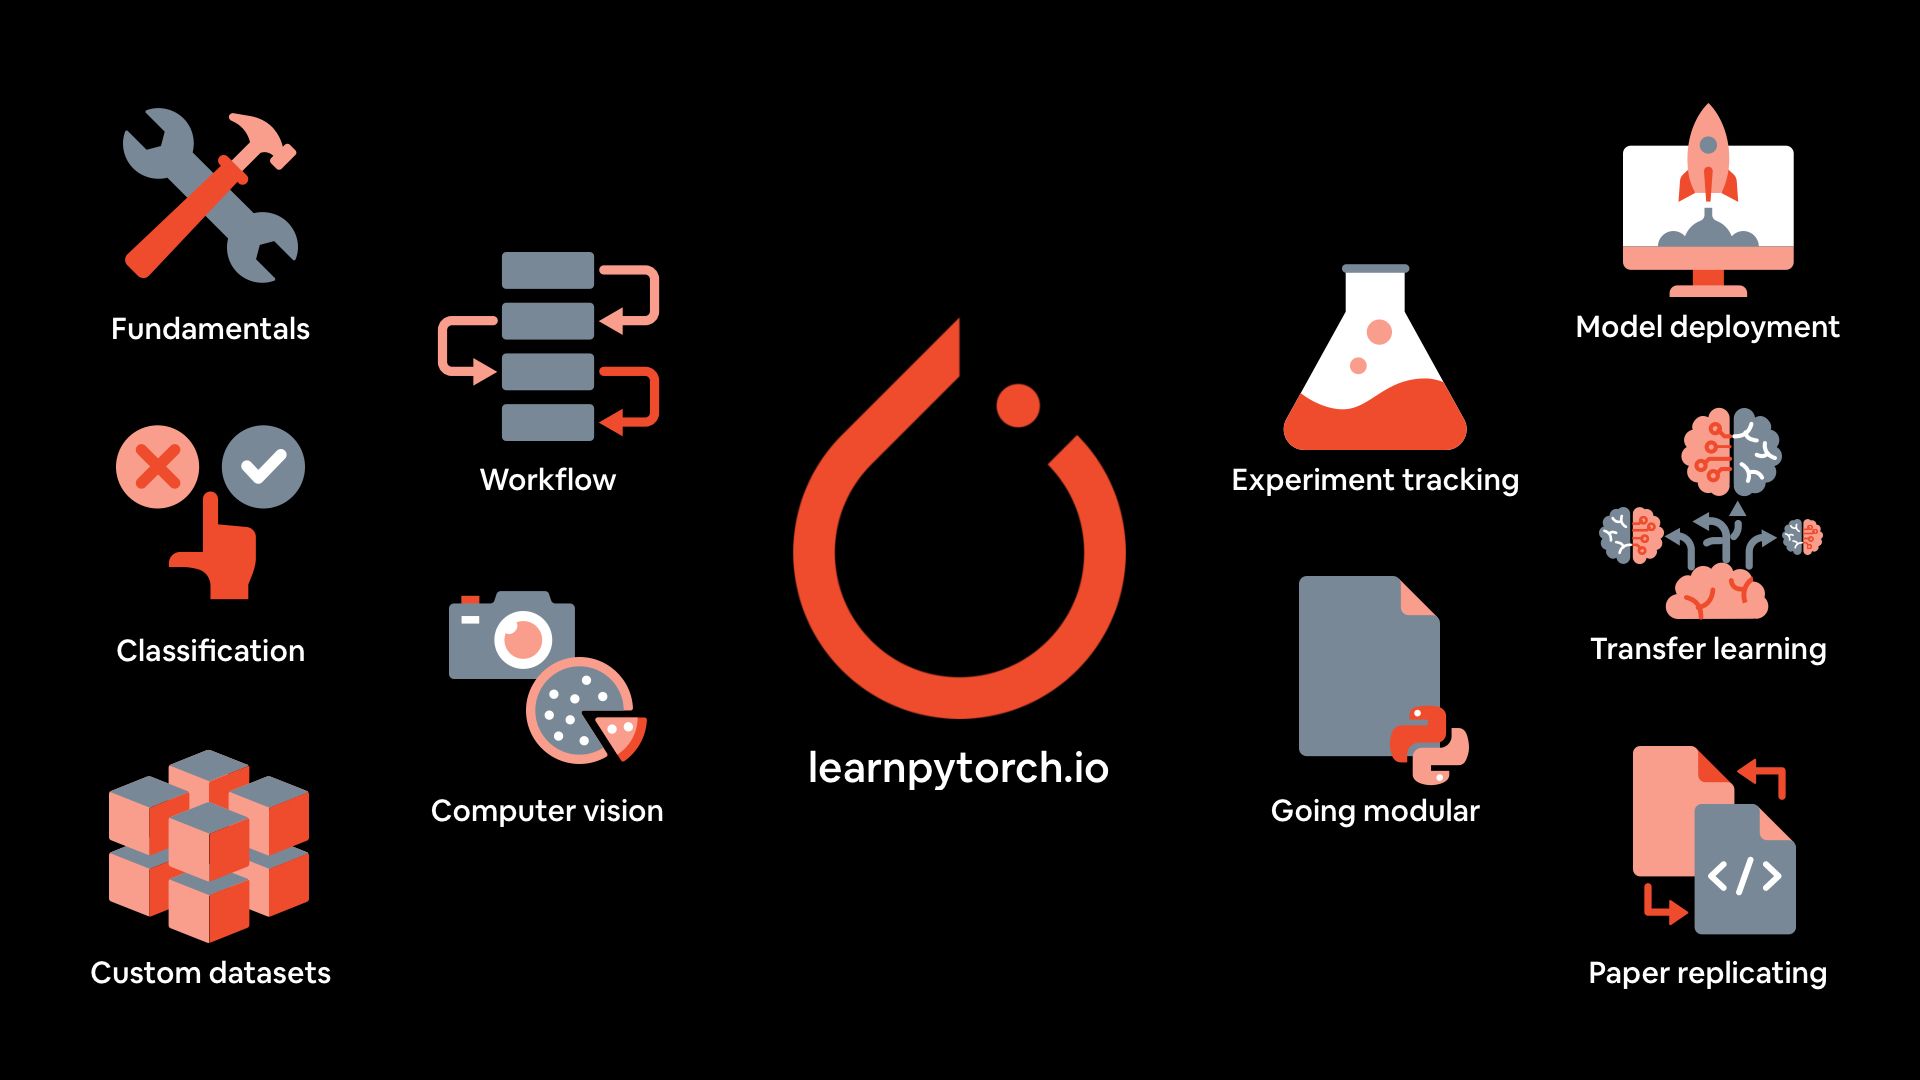 learnpytorch.io cover image detailing all of the different sections of the Learn PyTorch for Deep Learning course